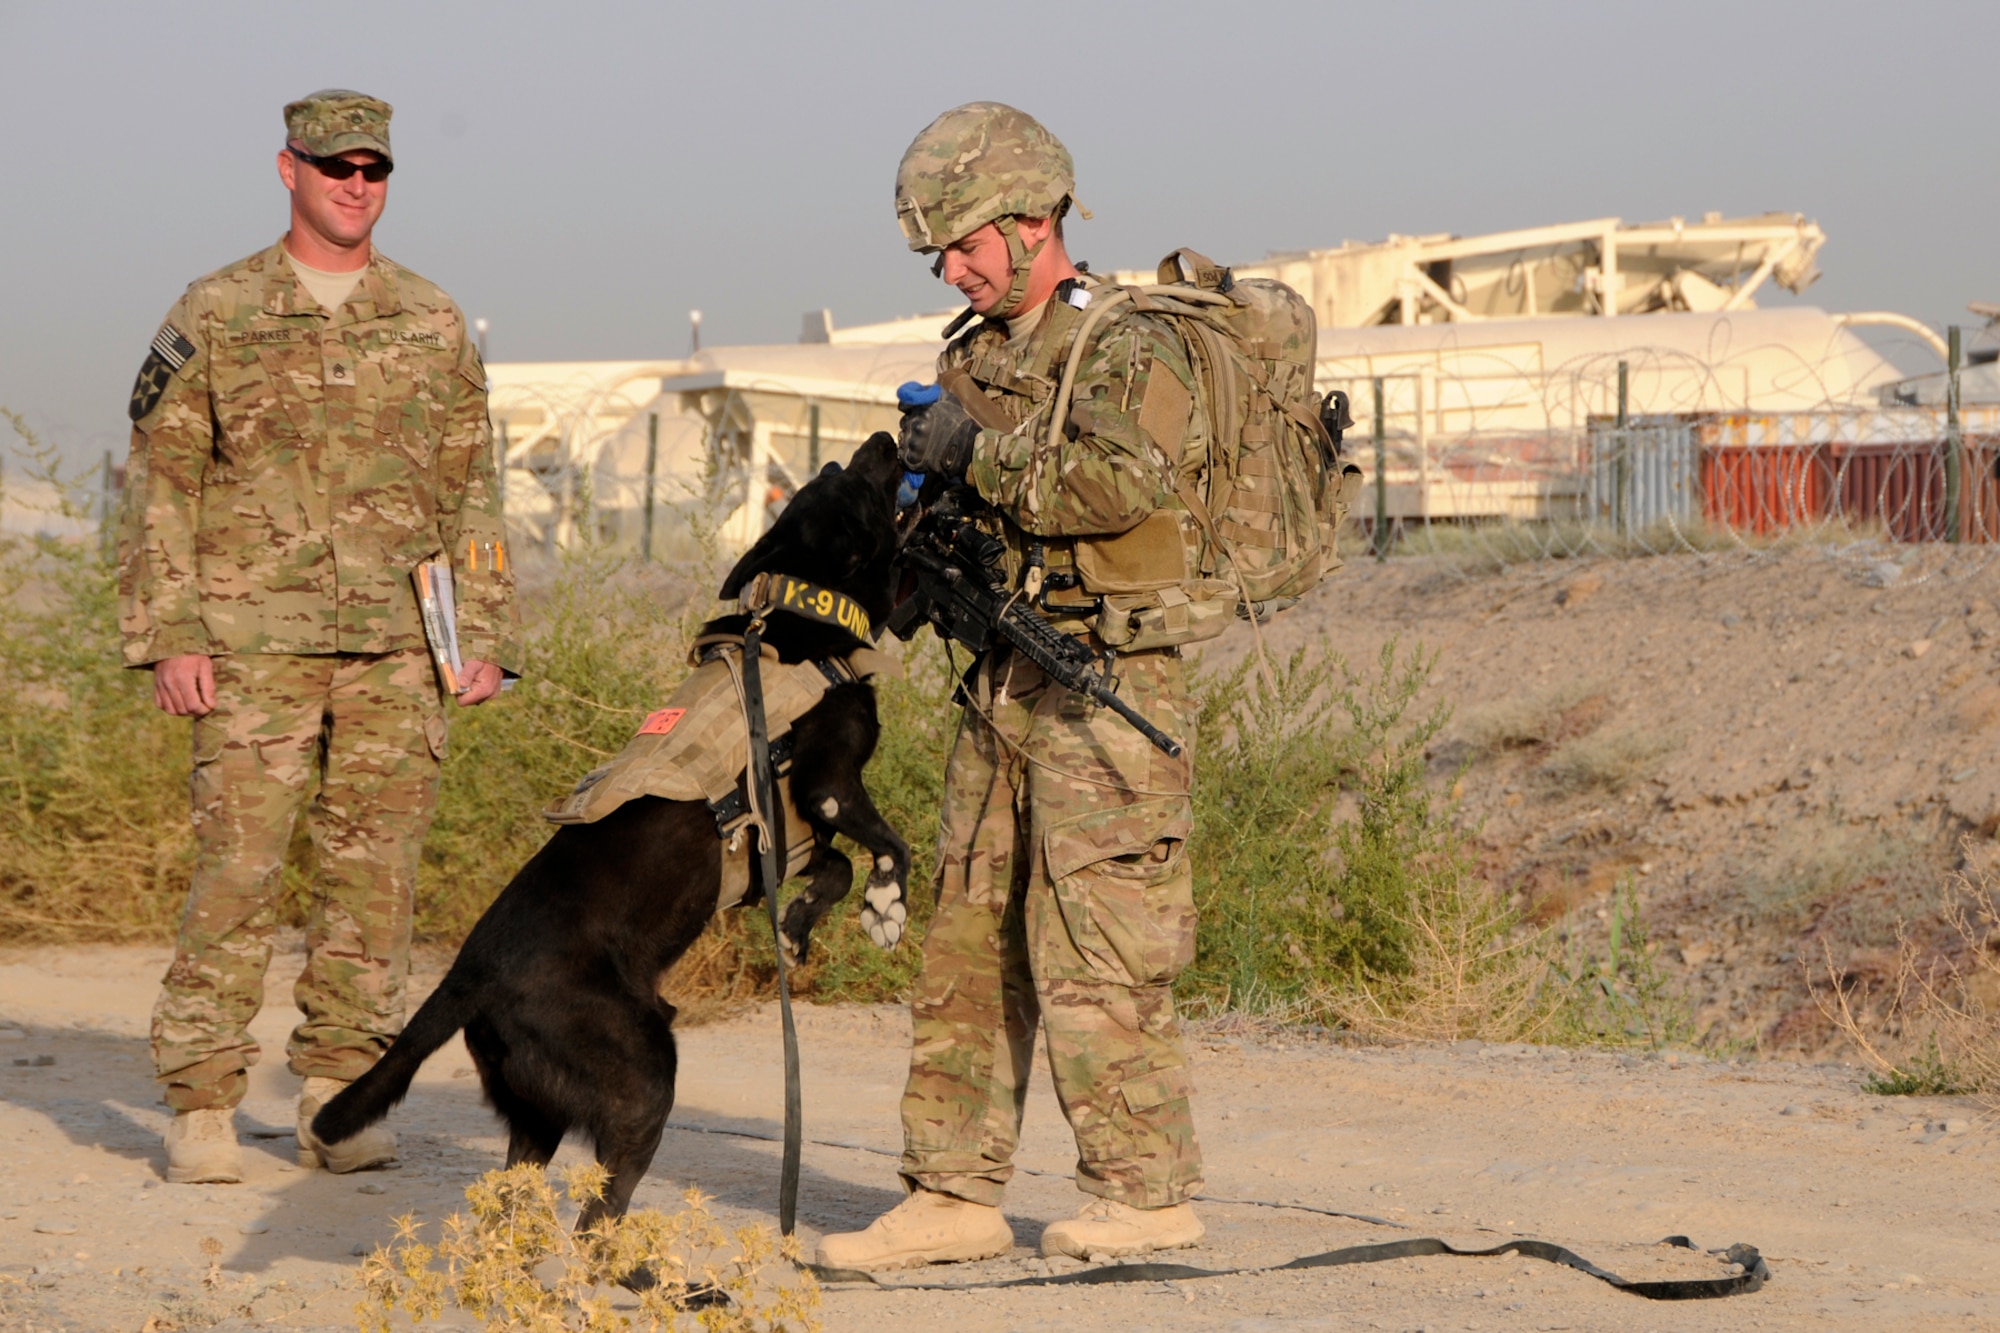 U.S. Air Force Staff Sgt. Larry Harris, a Military Working Dog handler, rewards his dog, Aaron, for finding simulated explosives buried along a road at Kandahar Airfield, Afghanistan on July 9, 2012 during a training exercise while U.S. Army Staff Sgt. Joshua Parker looks on. The handlers and their dogs rotate through Kandahar Airfield for validation prior to moving out to Forward Operating Bases around the country where they will lead combat foot patrols and sniff out IEDs and other explosives. (U.S. Air Force photo/TSgt. Stephen Hudson) 